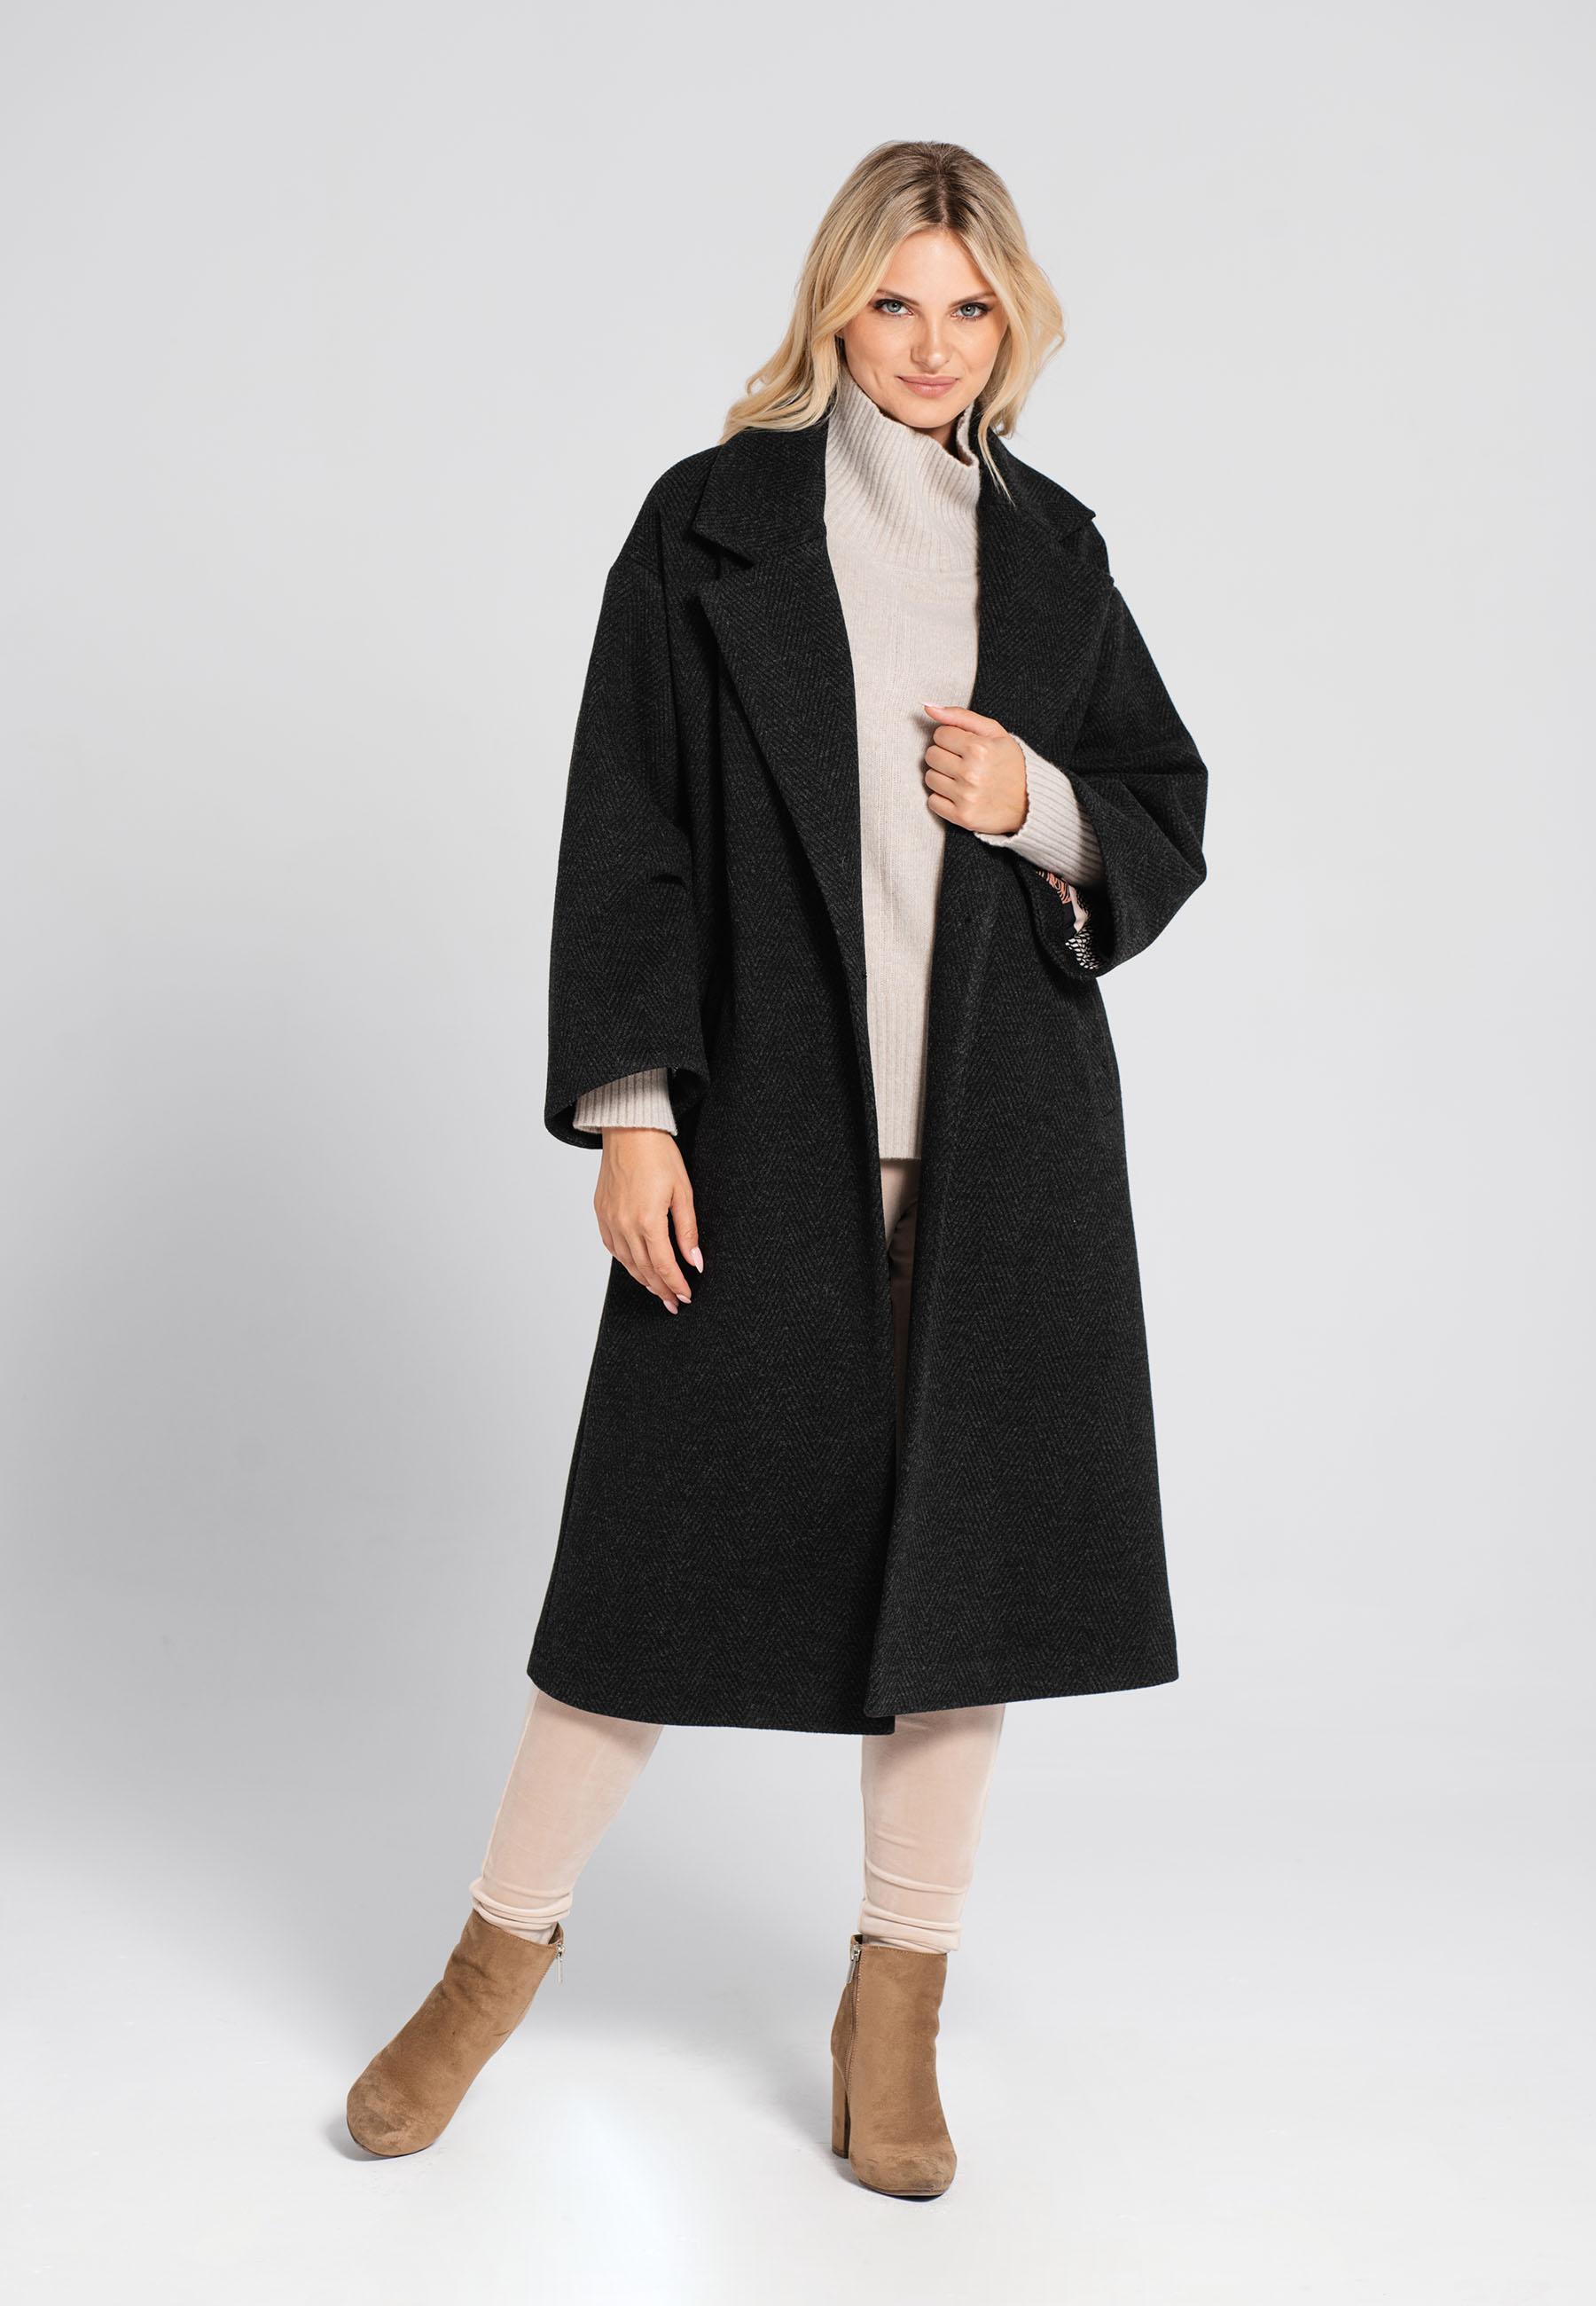 Look Made With Love Woman's Coat 904 Chanel